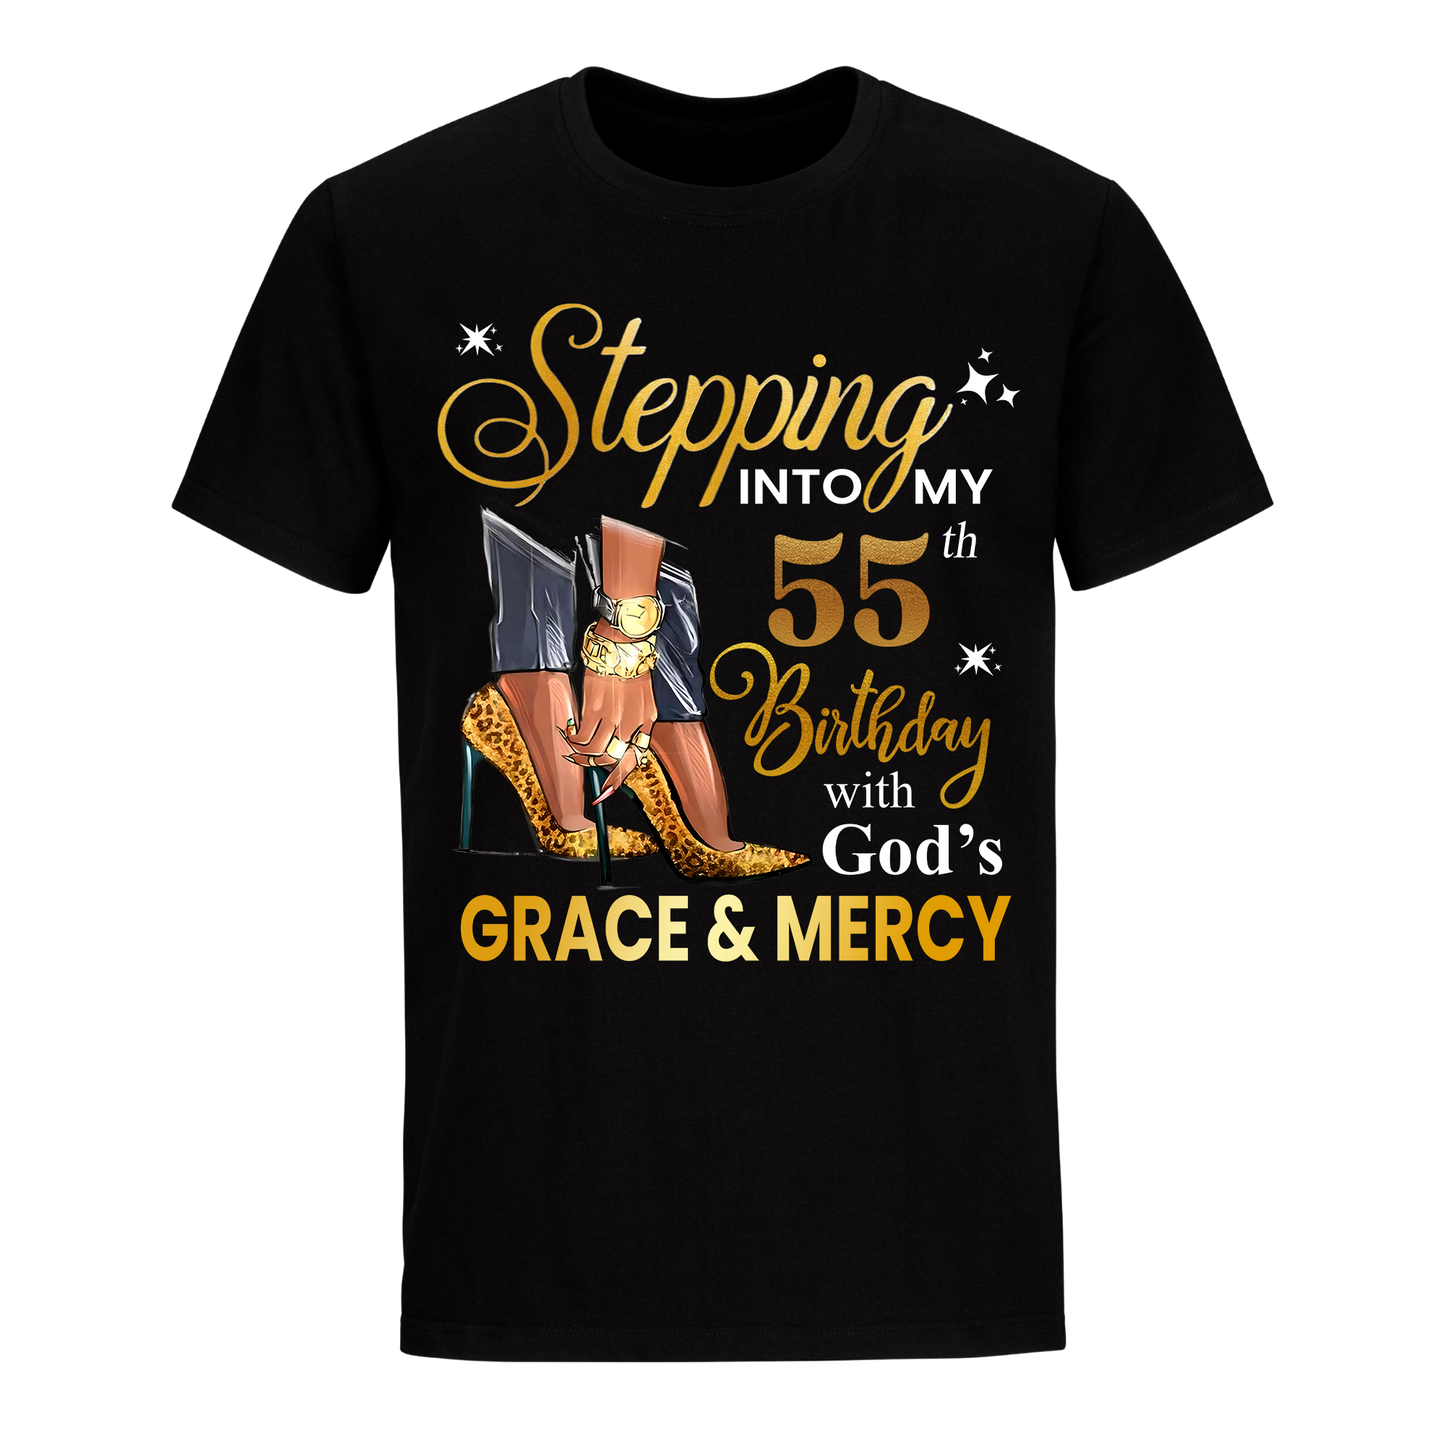 STEPPING INTO MY GRACE AND MERCY 55TH BIRTHDAY UNISEX SHIRT